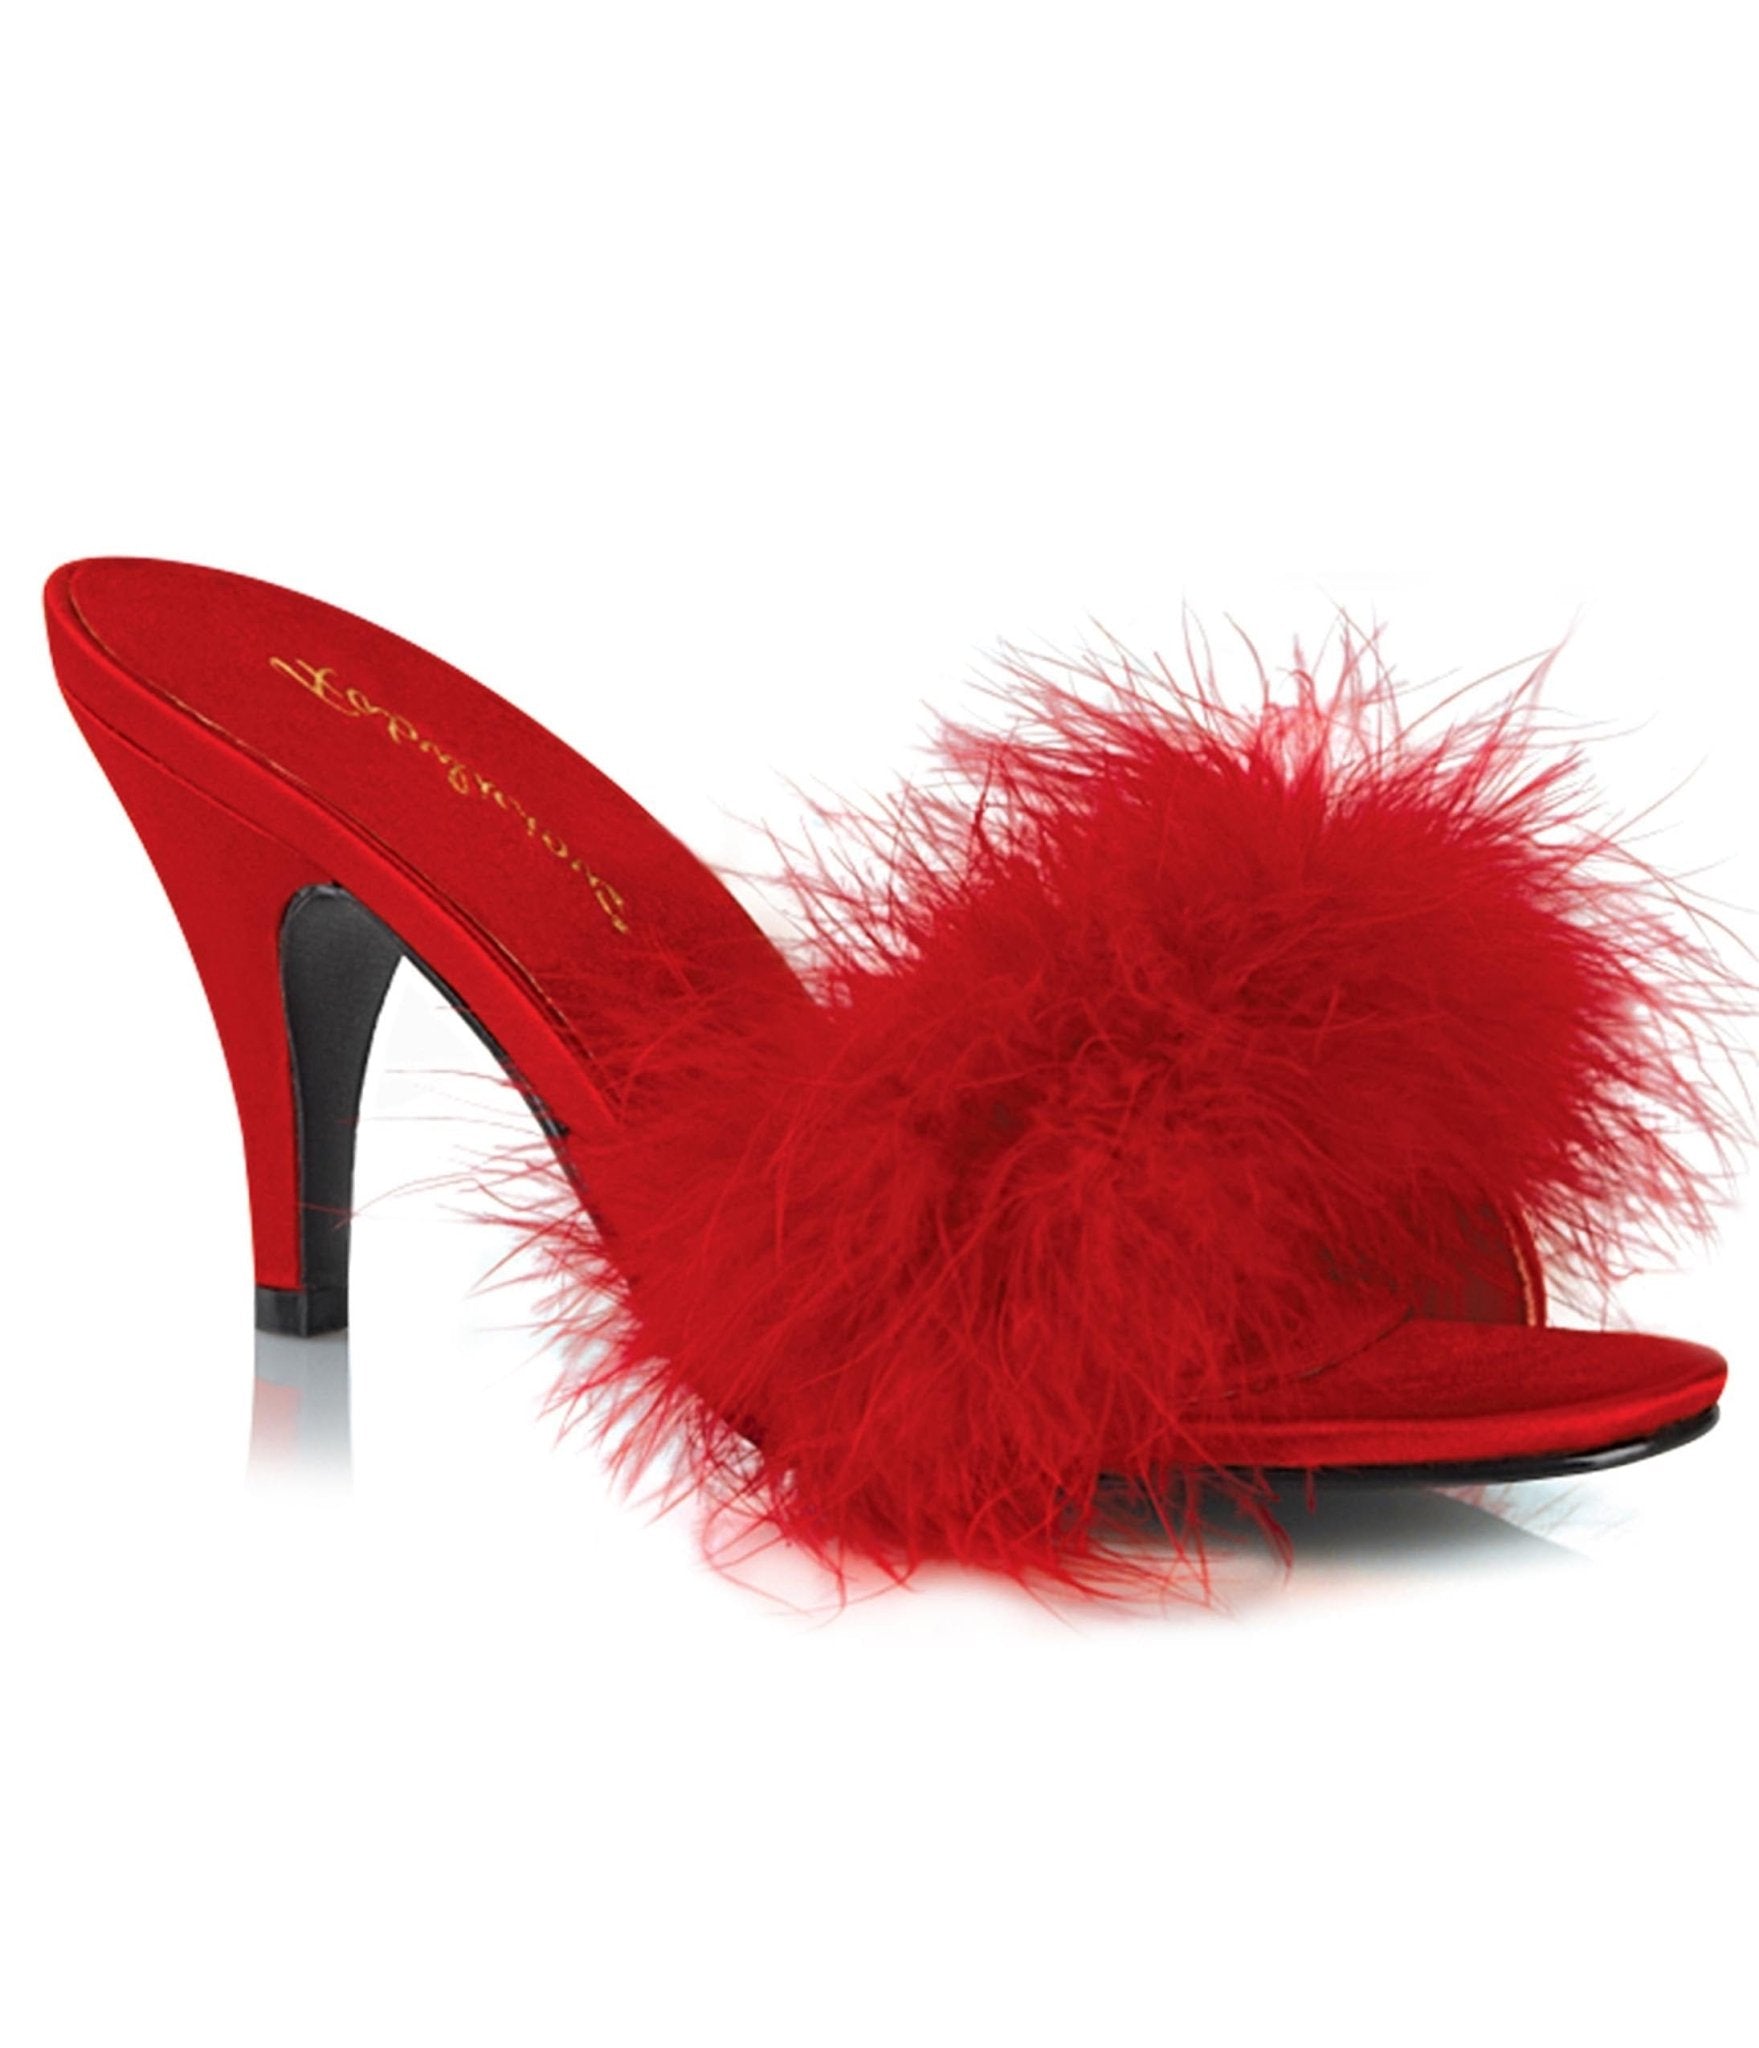 Red Satin & Marabou Feather Peep Toe Amour Heel Slipper - Unique Vintage - Womens, SHOES, HEELS